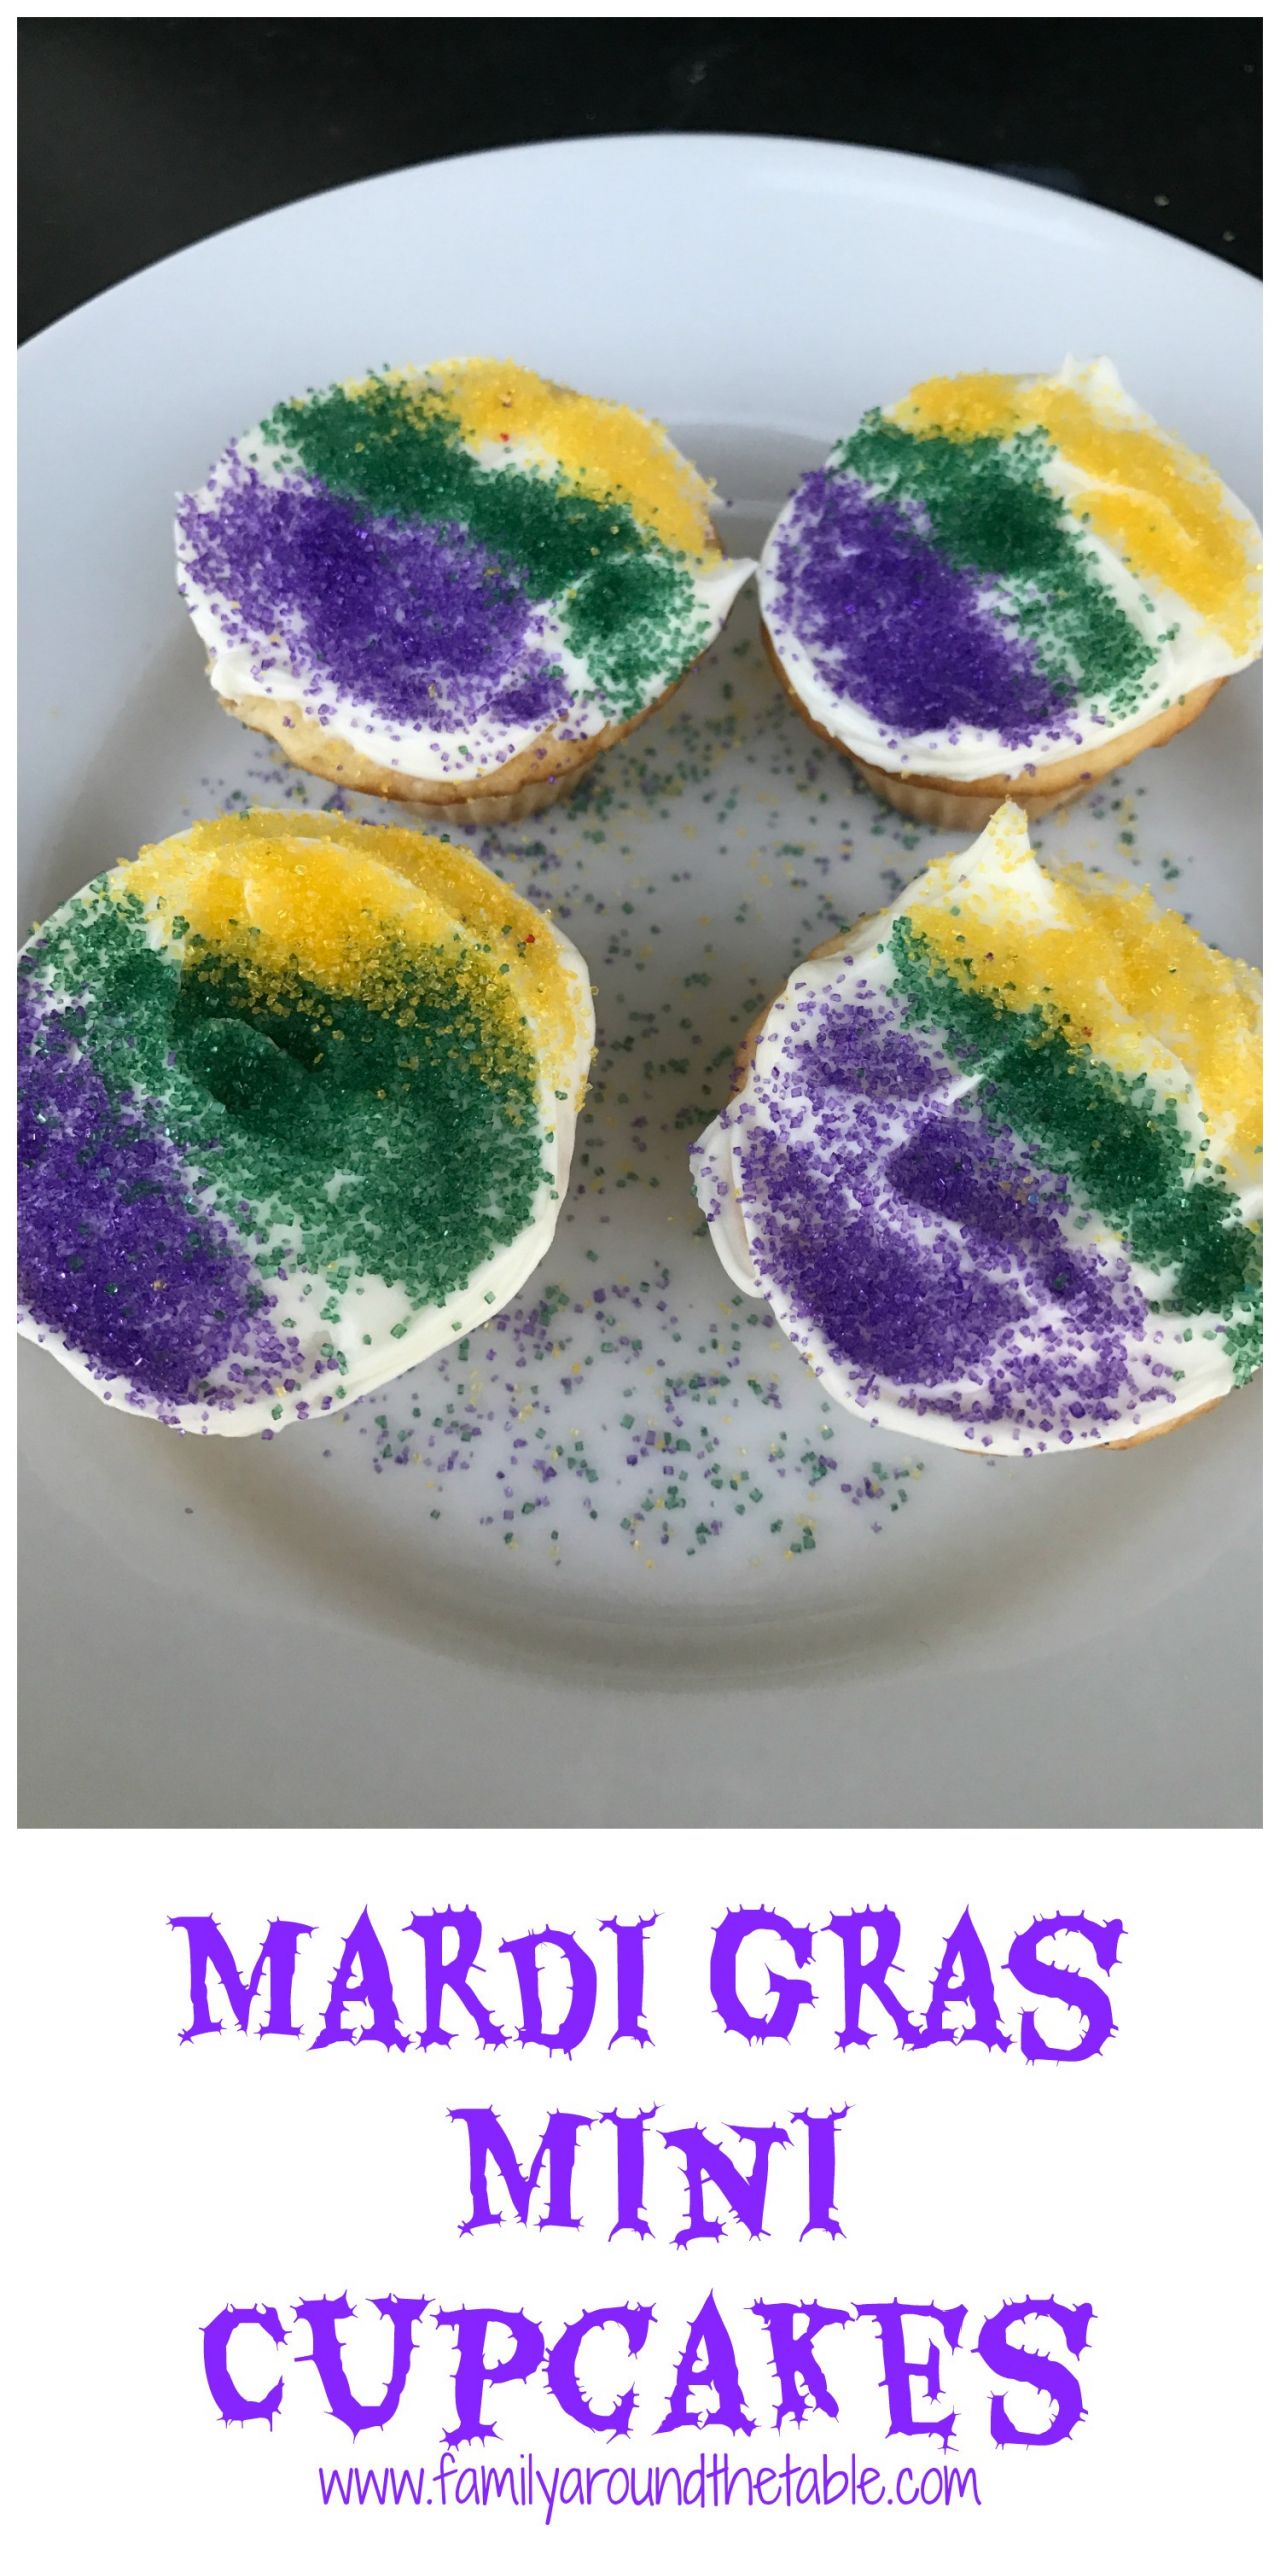 Mardi Gras Cupcakes
 Mardi Gras Cupcakes Mini Version • Family Around the Table